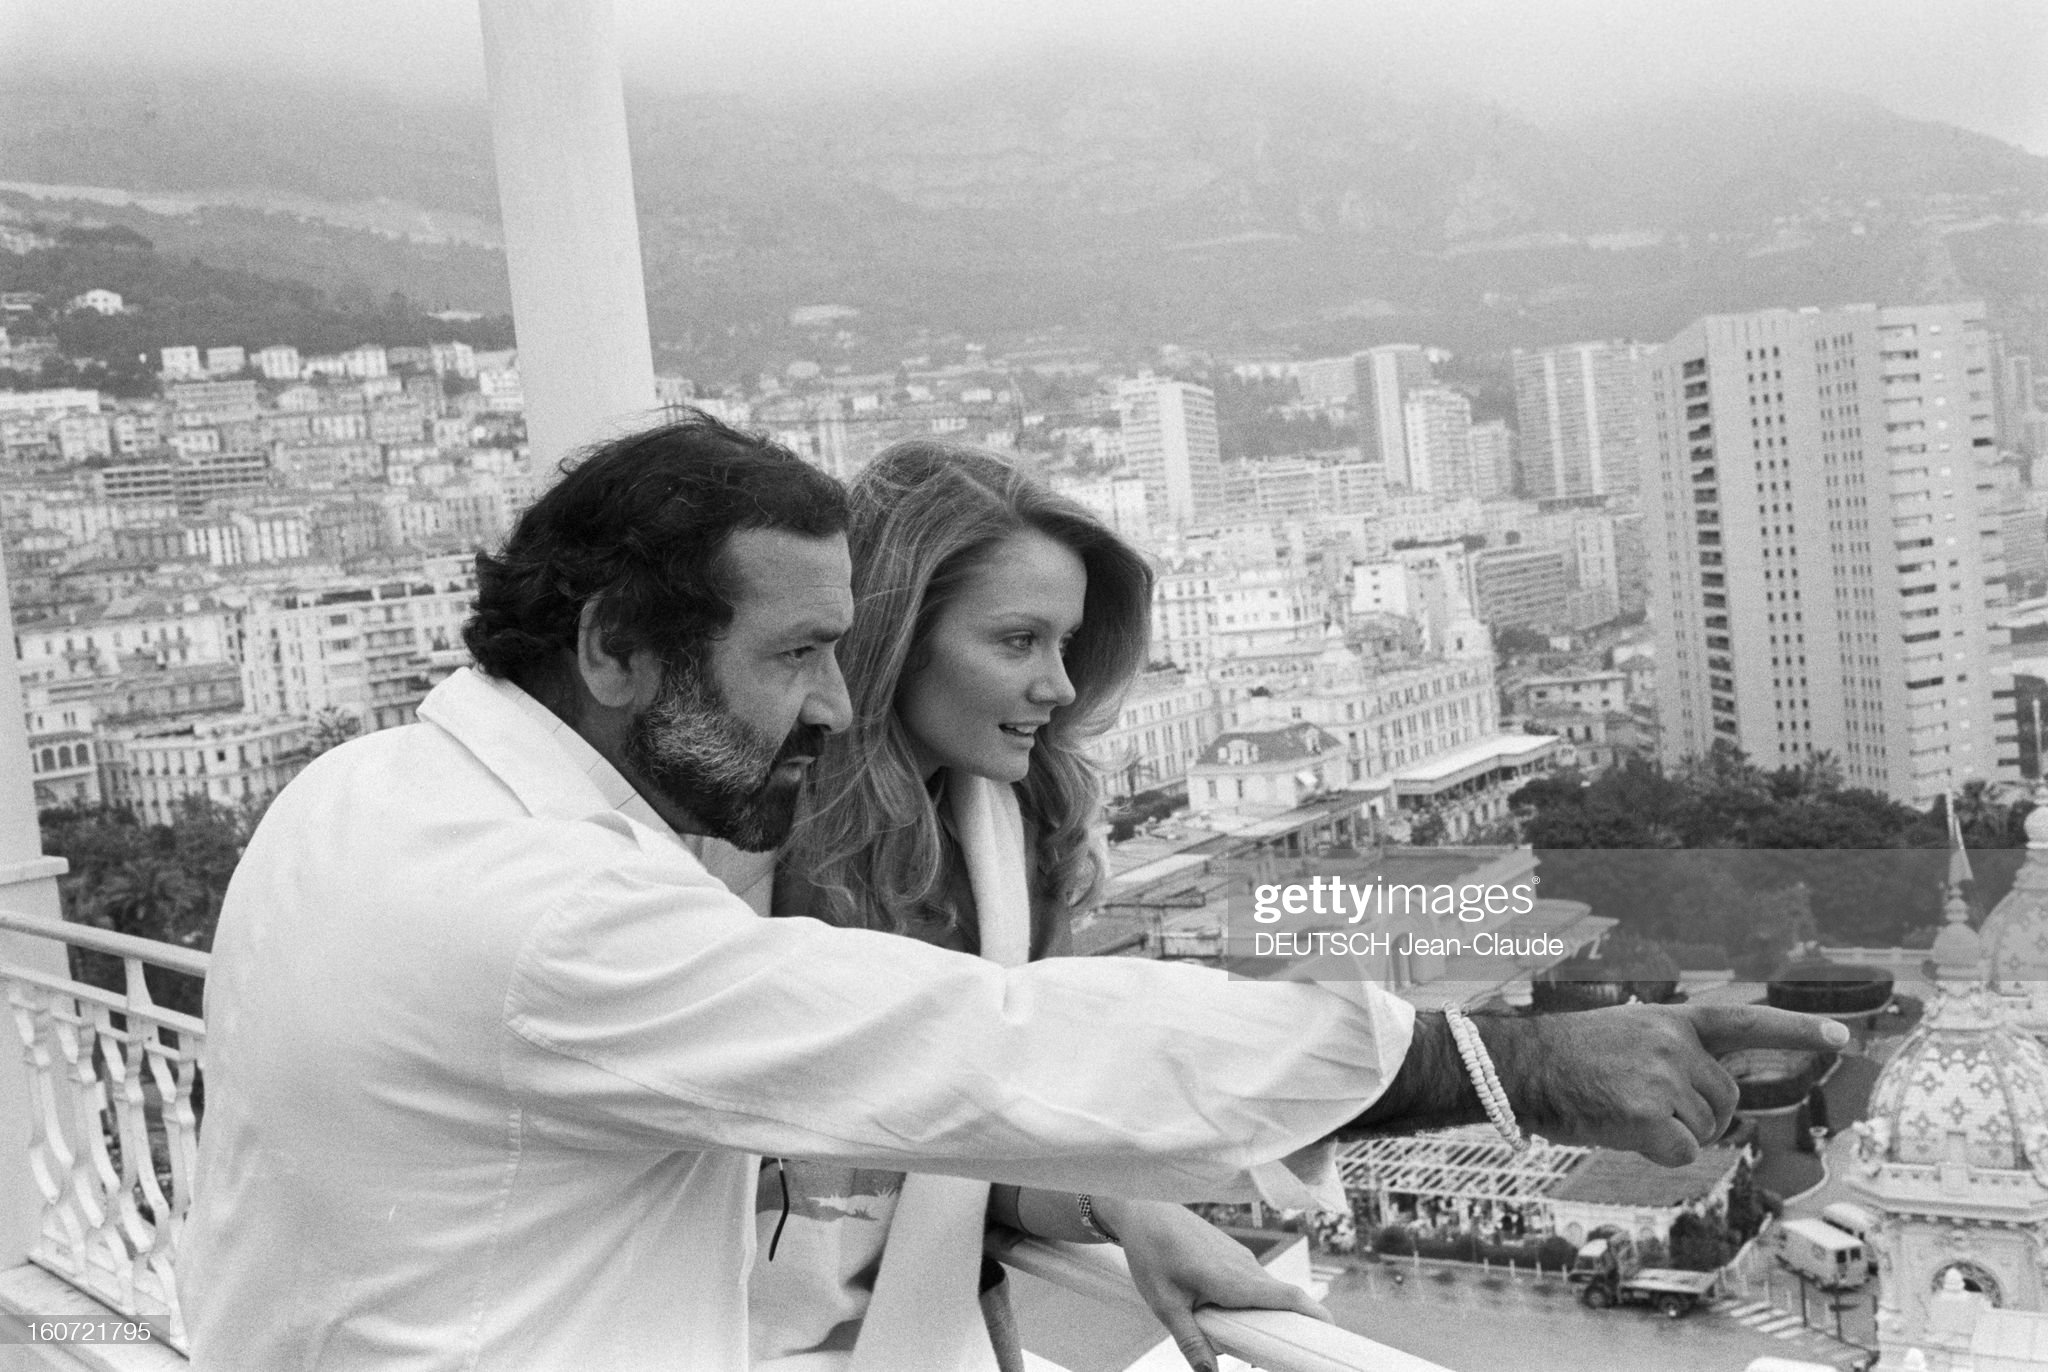 On May 18, 1980, during the Monaco Formula 1 Grand Prix, Jean Yanne and Mimi Coutelier on a terrace, watch the race.